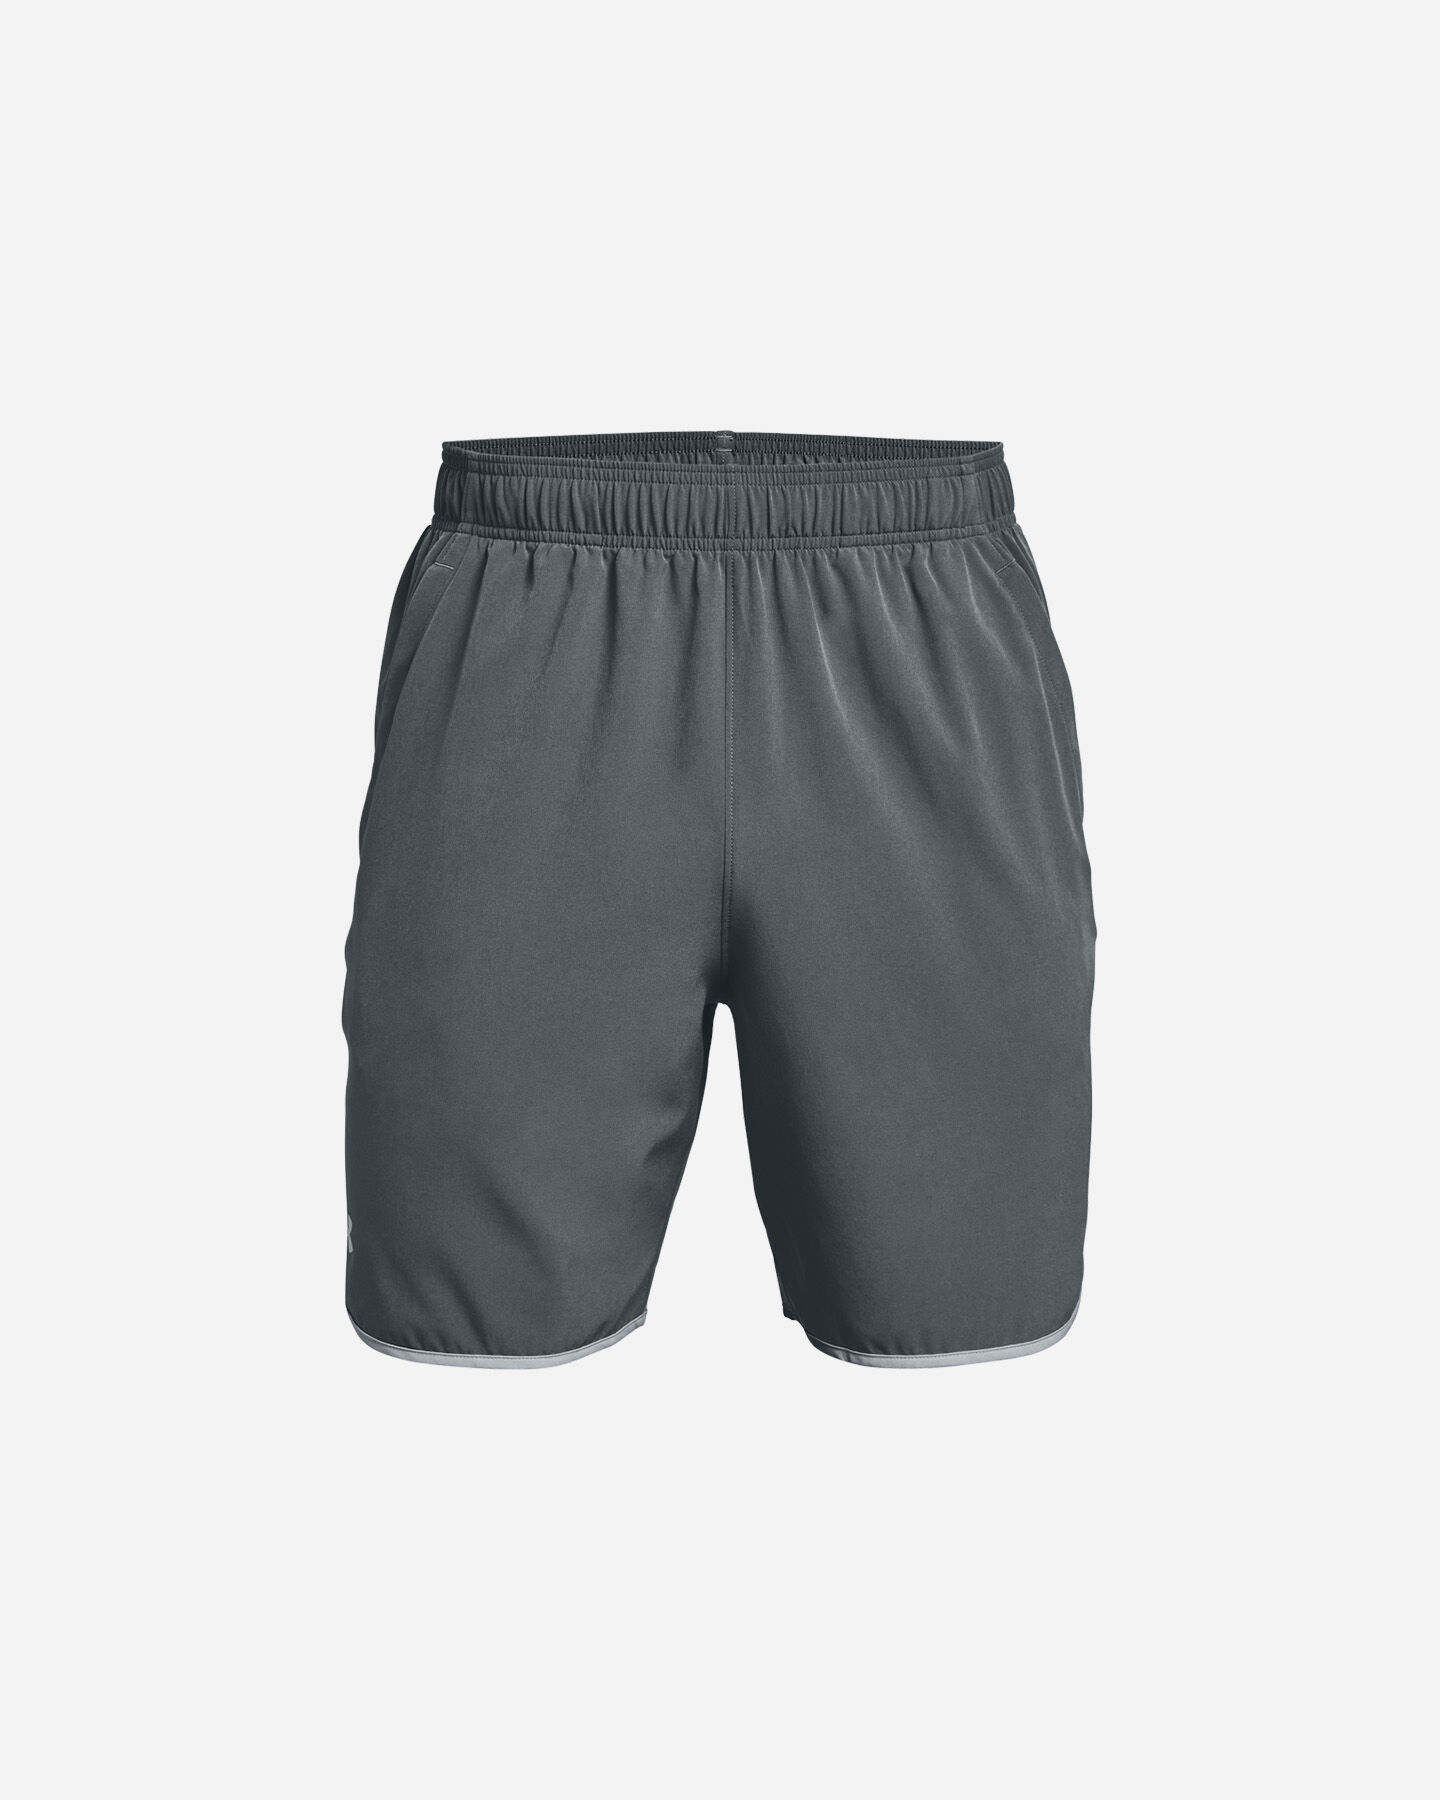  Pantalone training UNDER ARMOUR HIIT WOVEN M S5287183|0012|SM scatto 0